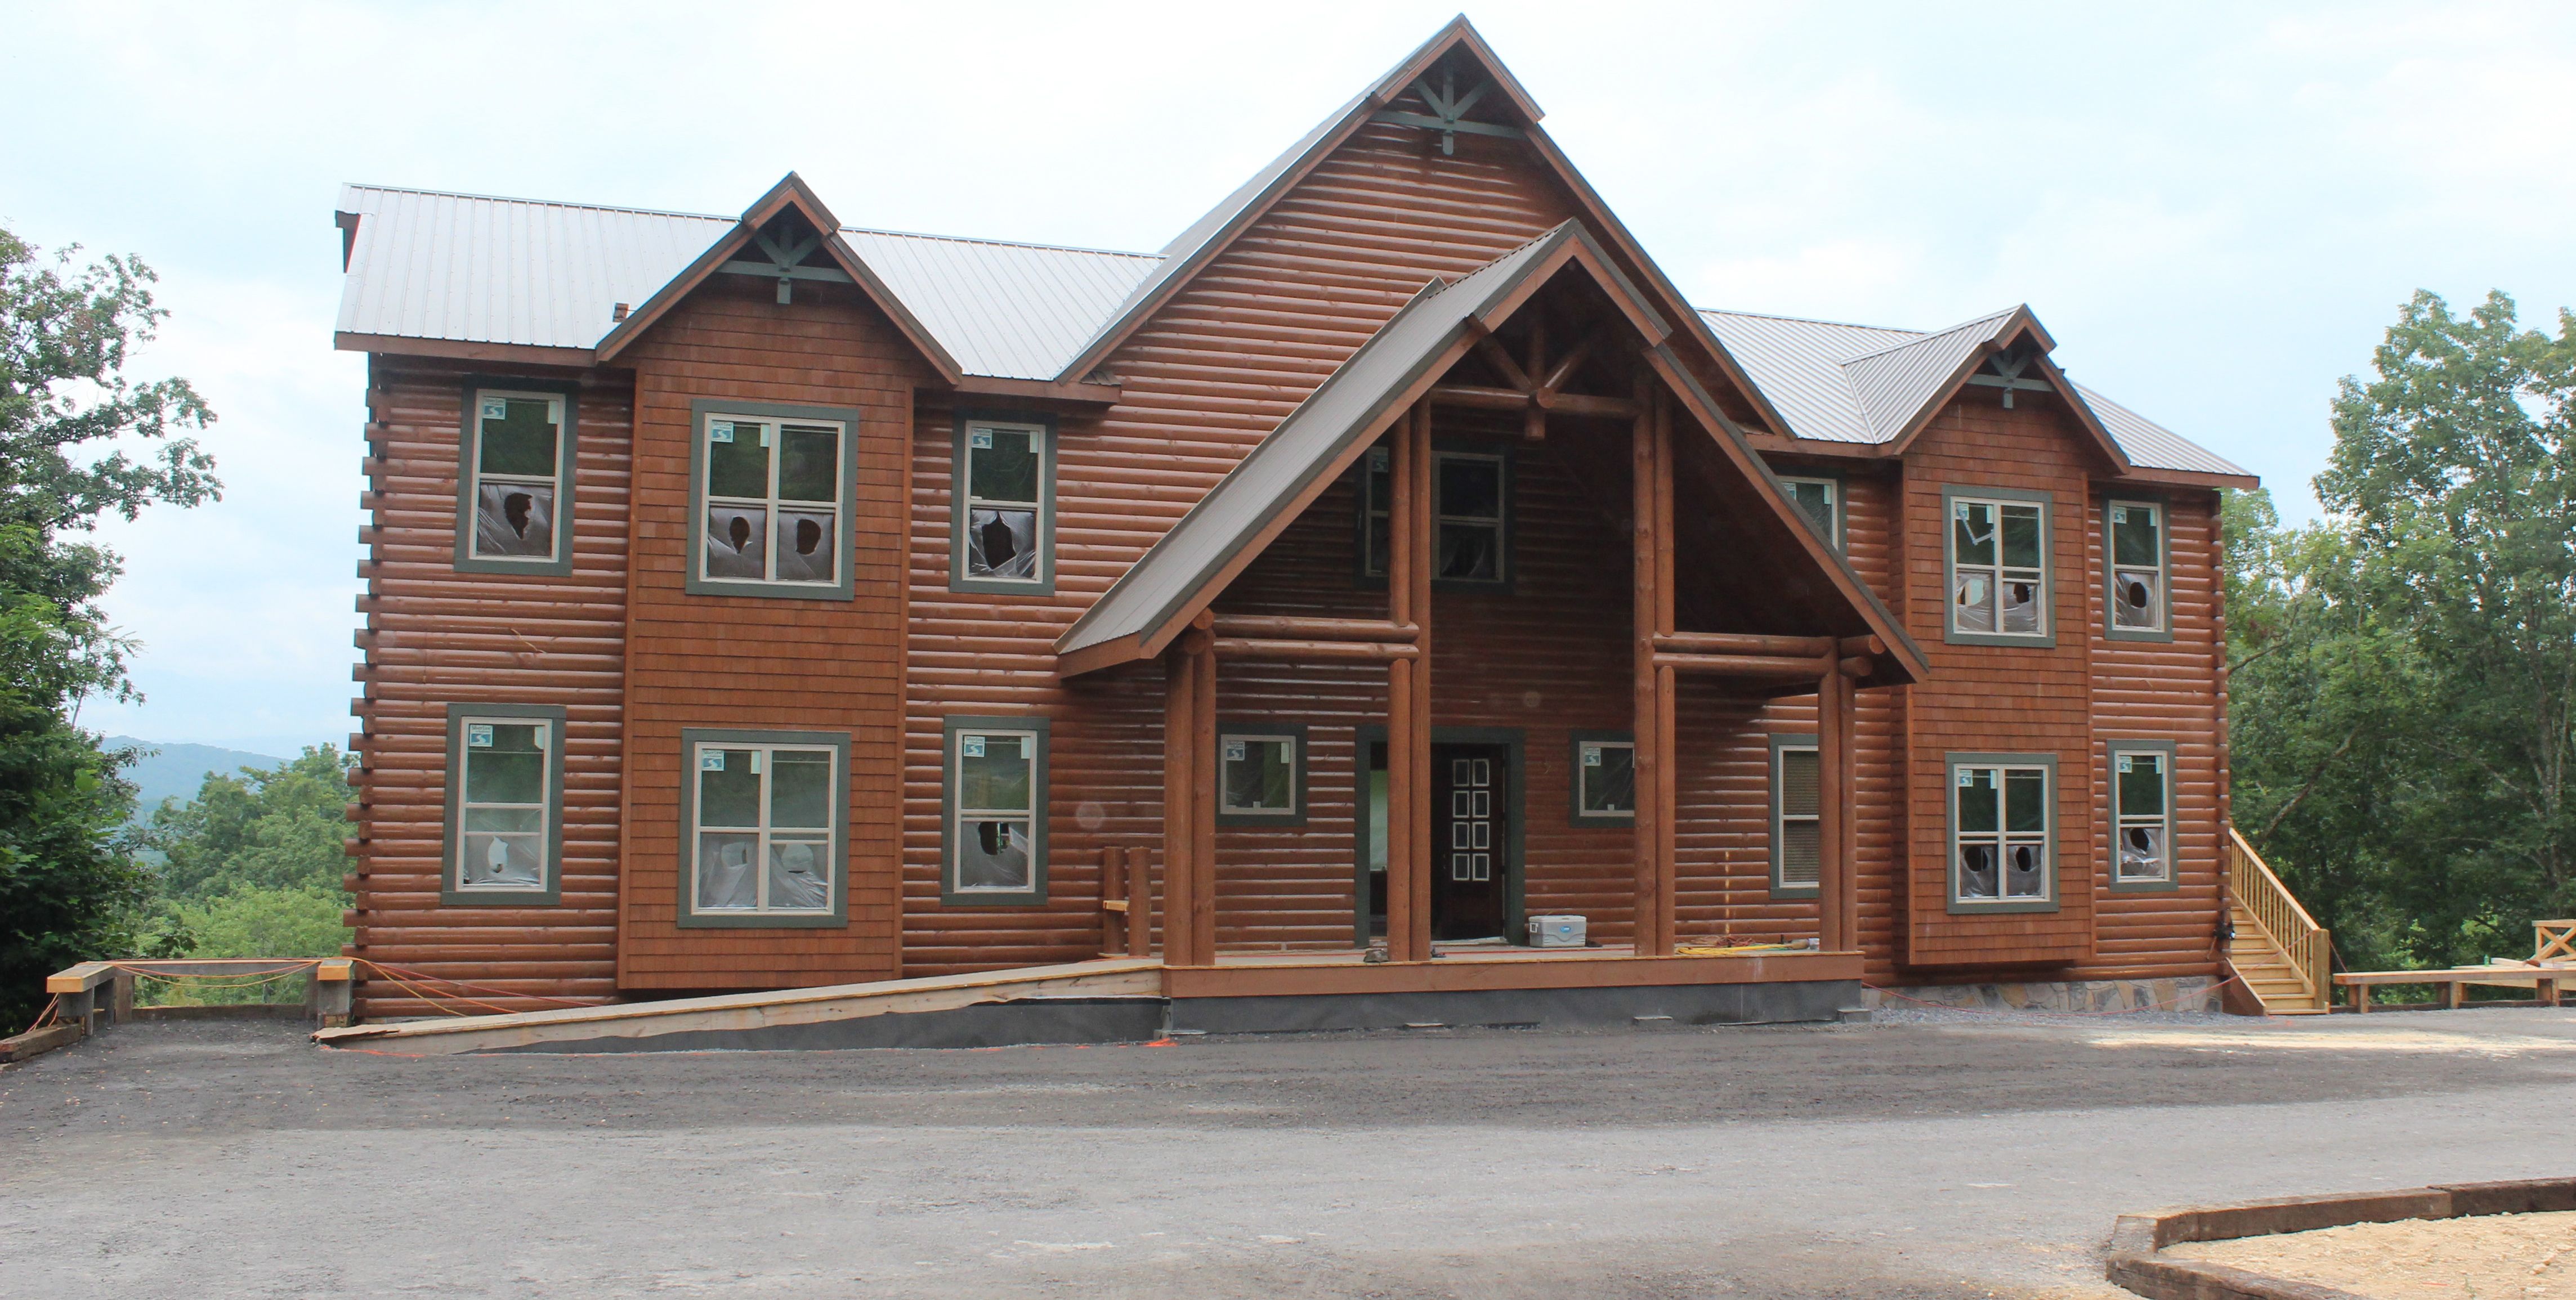 Construction on The Big Moose Lodge is scheduled to be completed by October 2013.